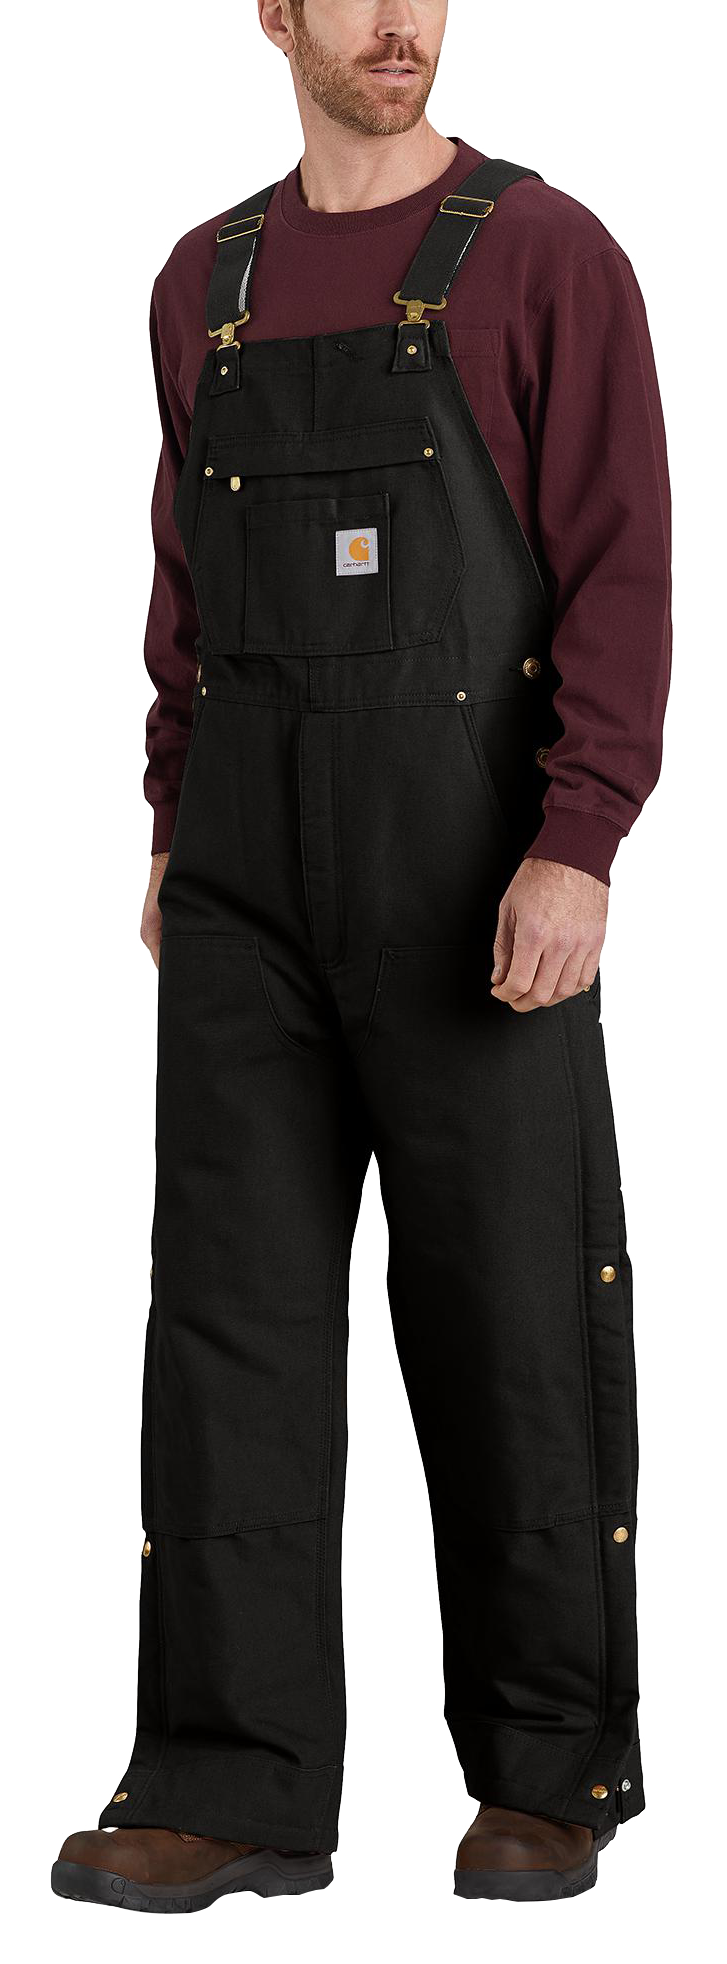 Carhartt Men's Loose Fit Firm Duck Insulated Bib Overall in Black -  Coveralls & Overalls, Carhartt